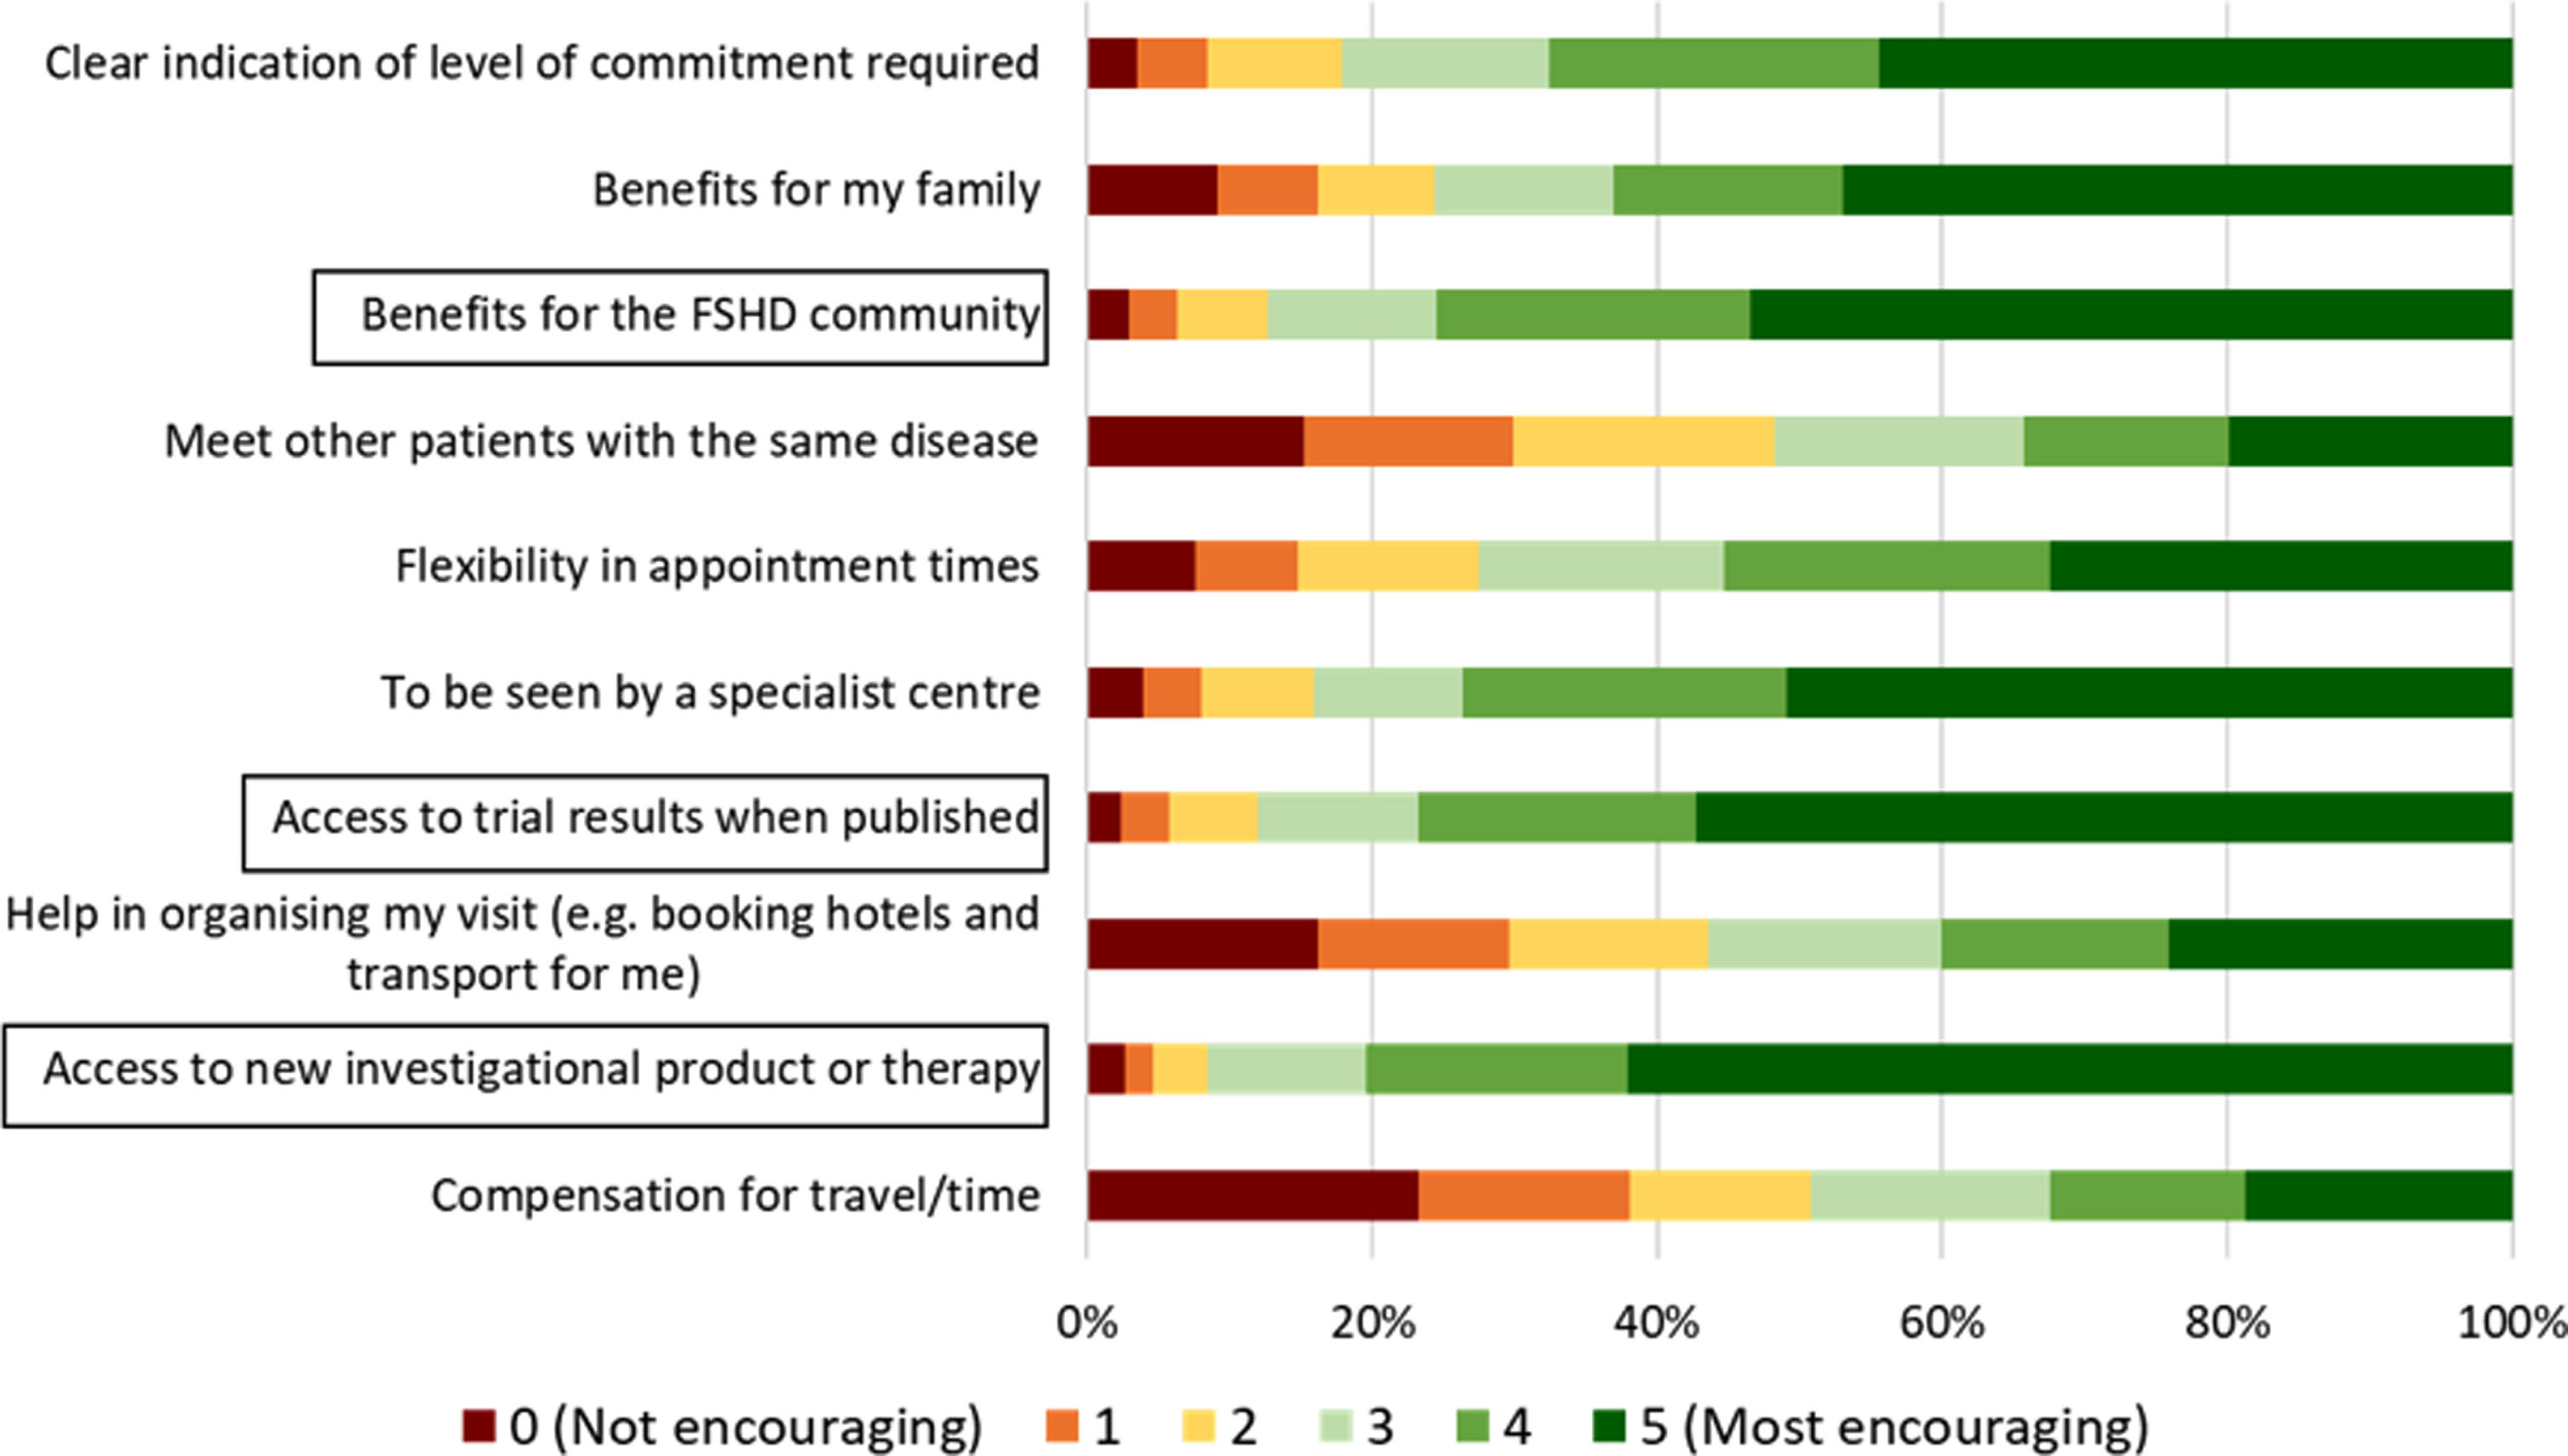 Positive factors for clinical trial participation. Participants (n = 1147) were asked to rank what factors would most encourage them to participate in a clinical trial from 0 (red; not encouraging) to 5 (dark green; most encouraging). Black boxes indicate the top three factors that would be the most encouraging for the largest proportion of participants.